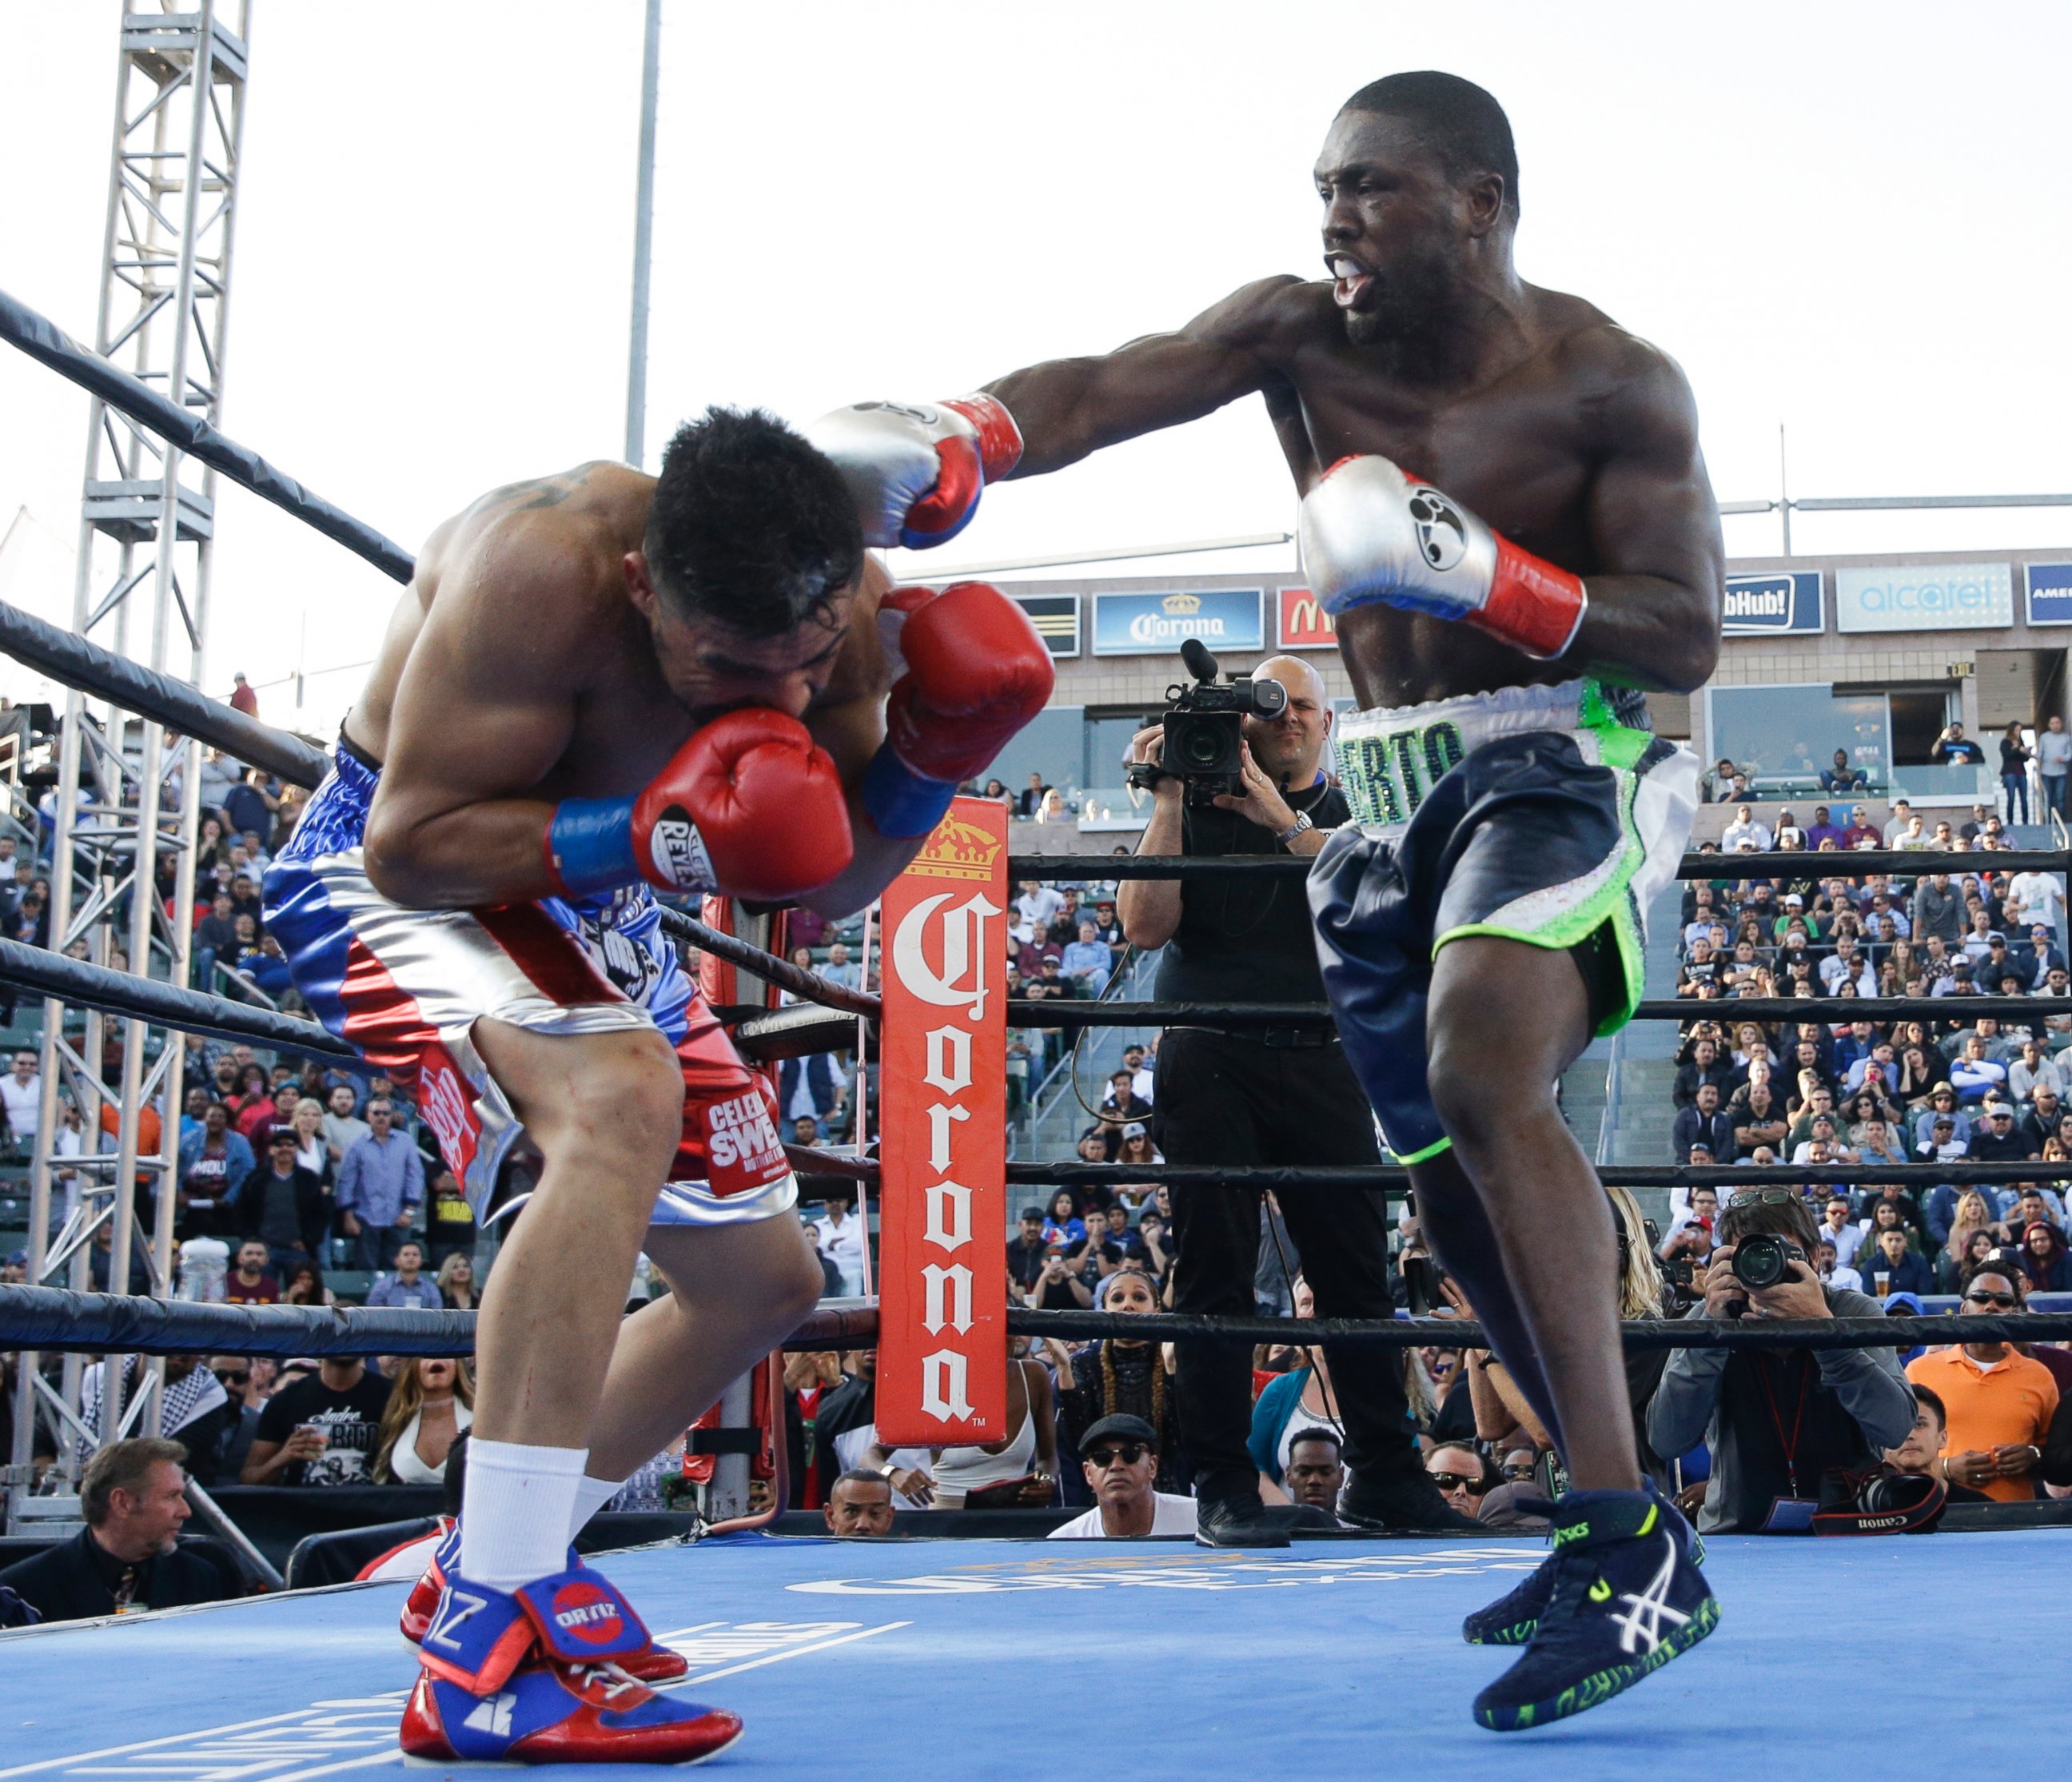 Andre Berto, right, lands a punch to Victor Ortiz during the fourth round of a welterweight boxing match, Saturday, April 30, 2016, in Carson, Calif. Berto won by knockout in the fourth round.